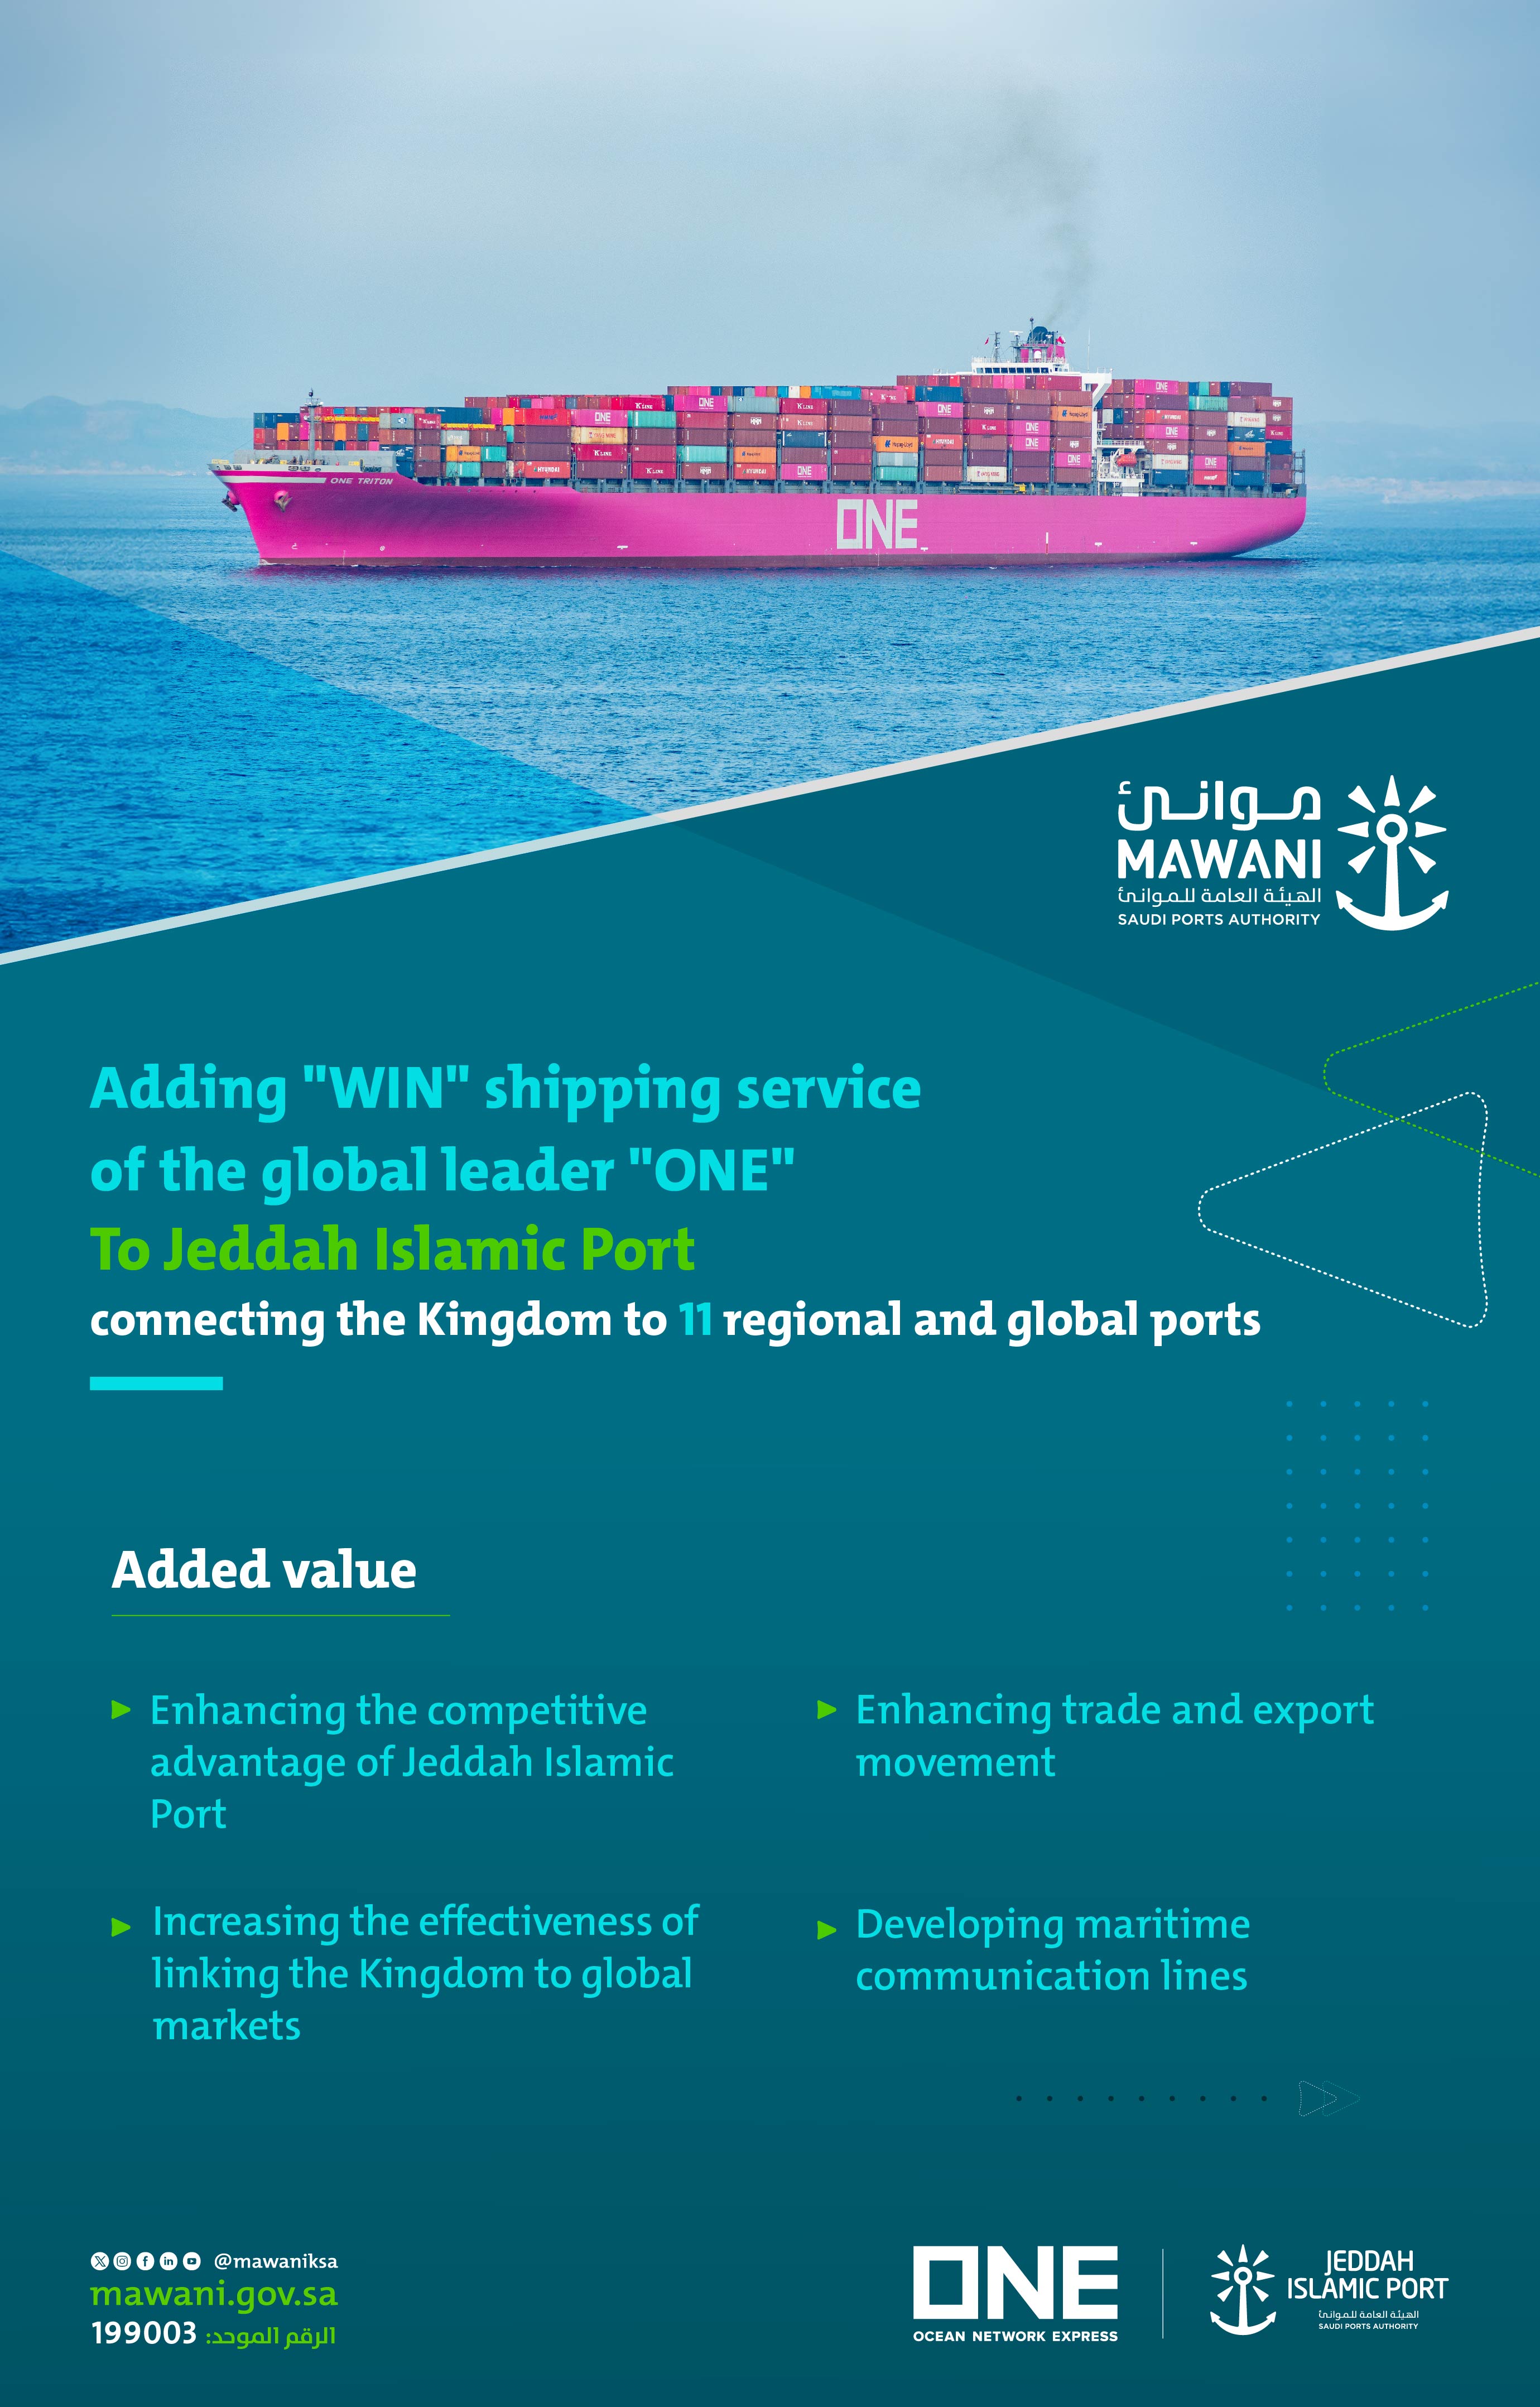 The addition of the WIN Cargo Service by ONE to Jeddah Islamic Port will boost maritime connectivity and contribute to global economic growth.